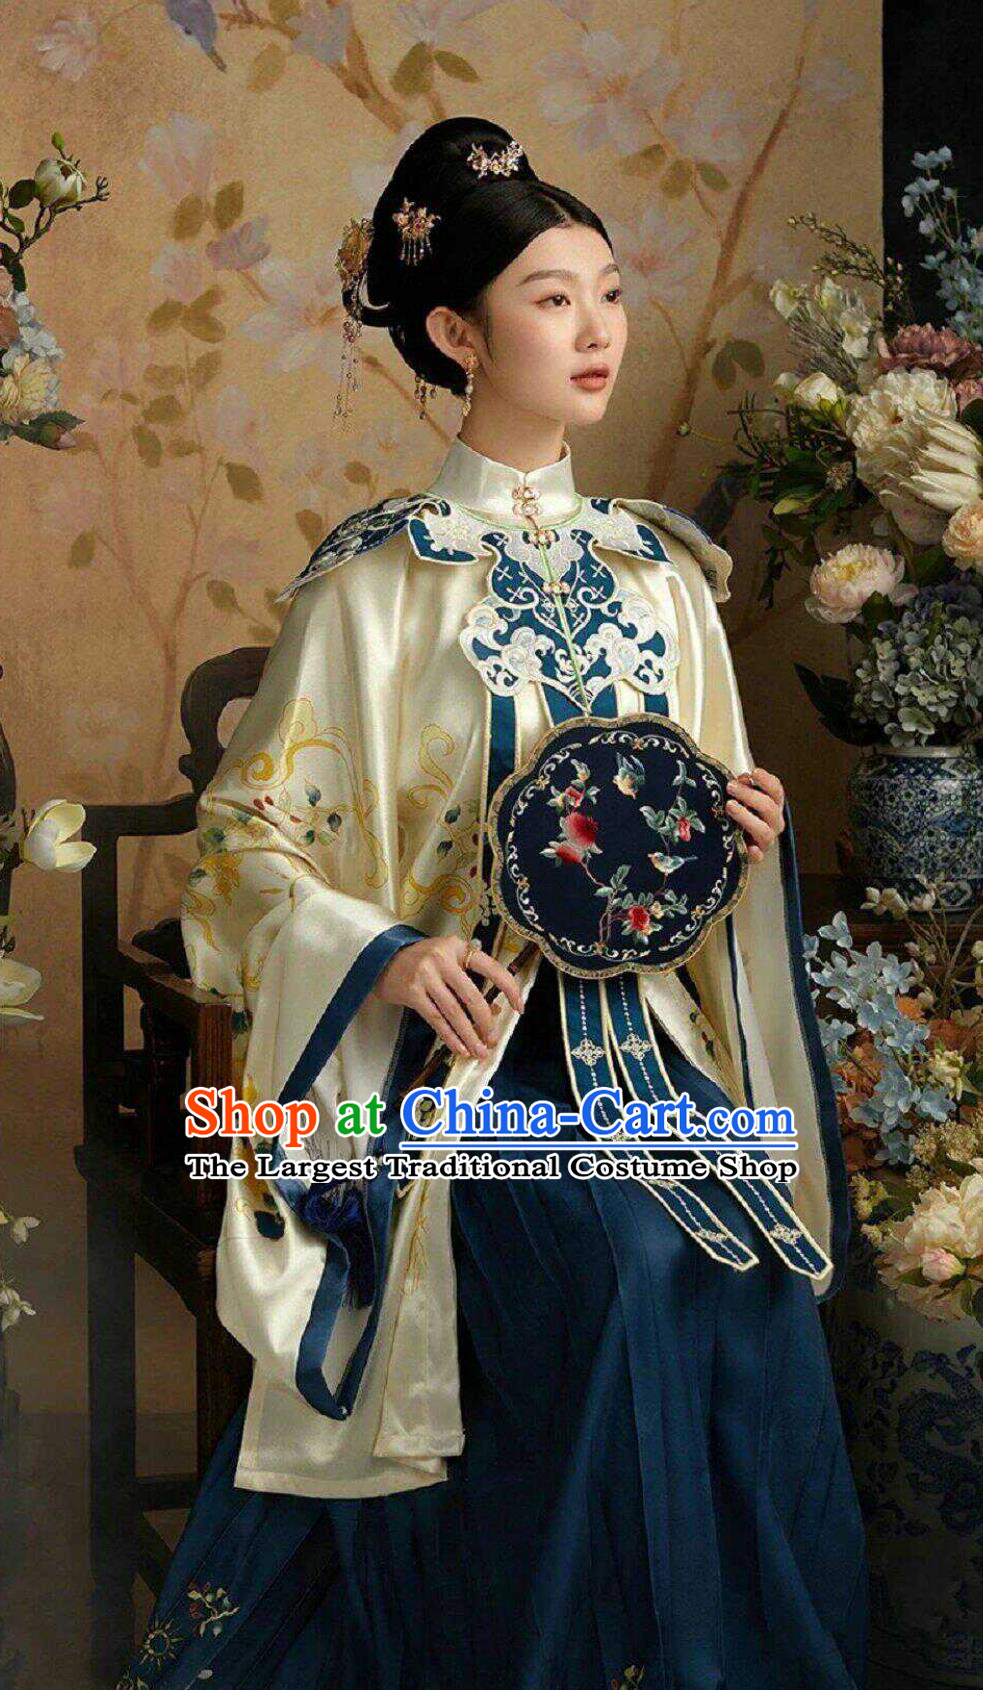 Ancient Chinese Ming Dynasty Female Costumes Chinese Traditional Hanfu Noble Woman Clothing Online Buy